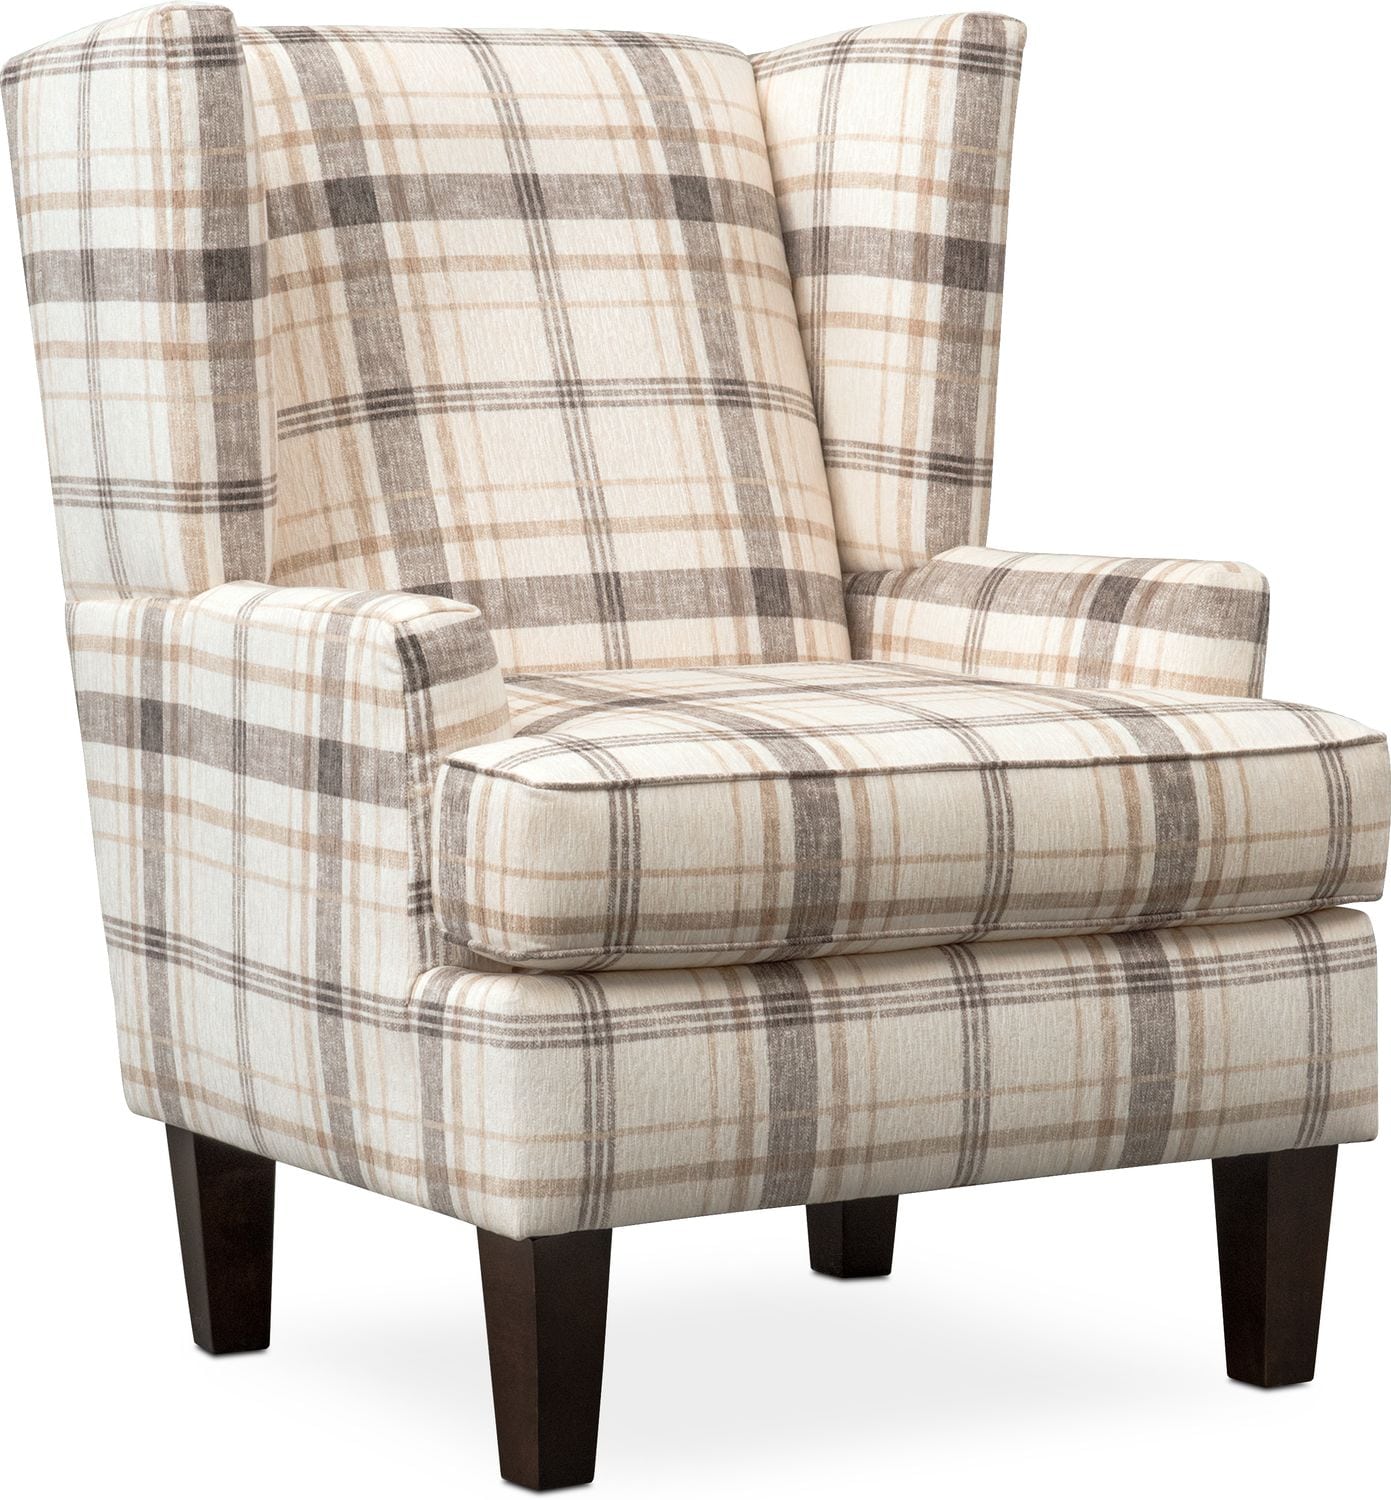 Rowan Accent Chair Value City Furniture And Mattresses